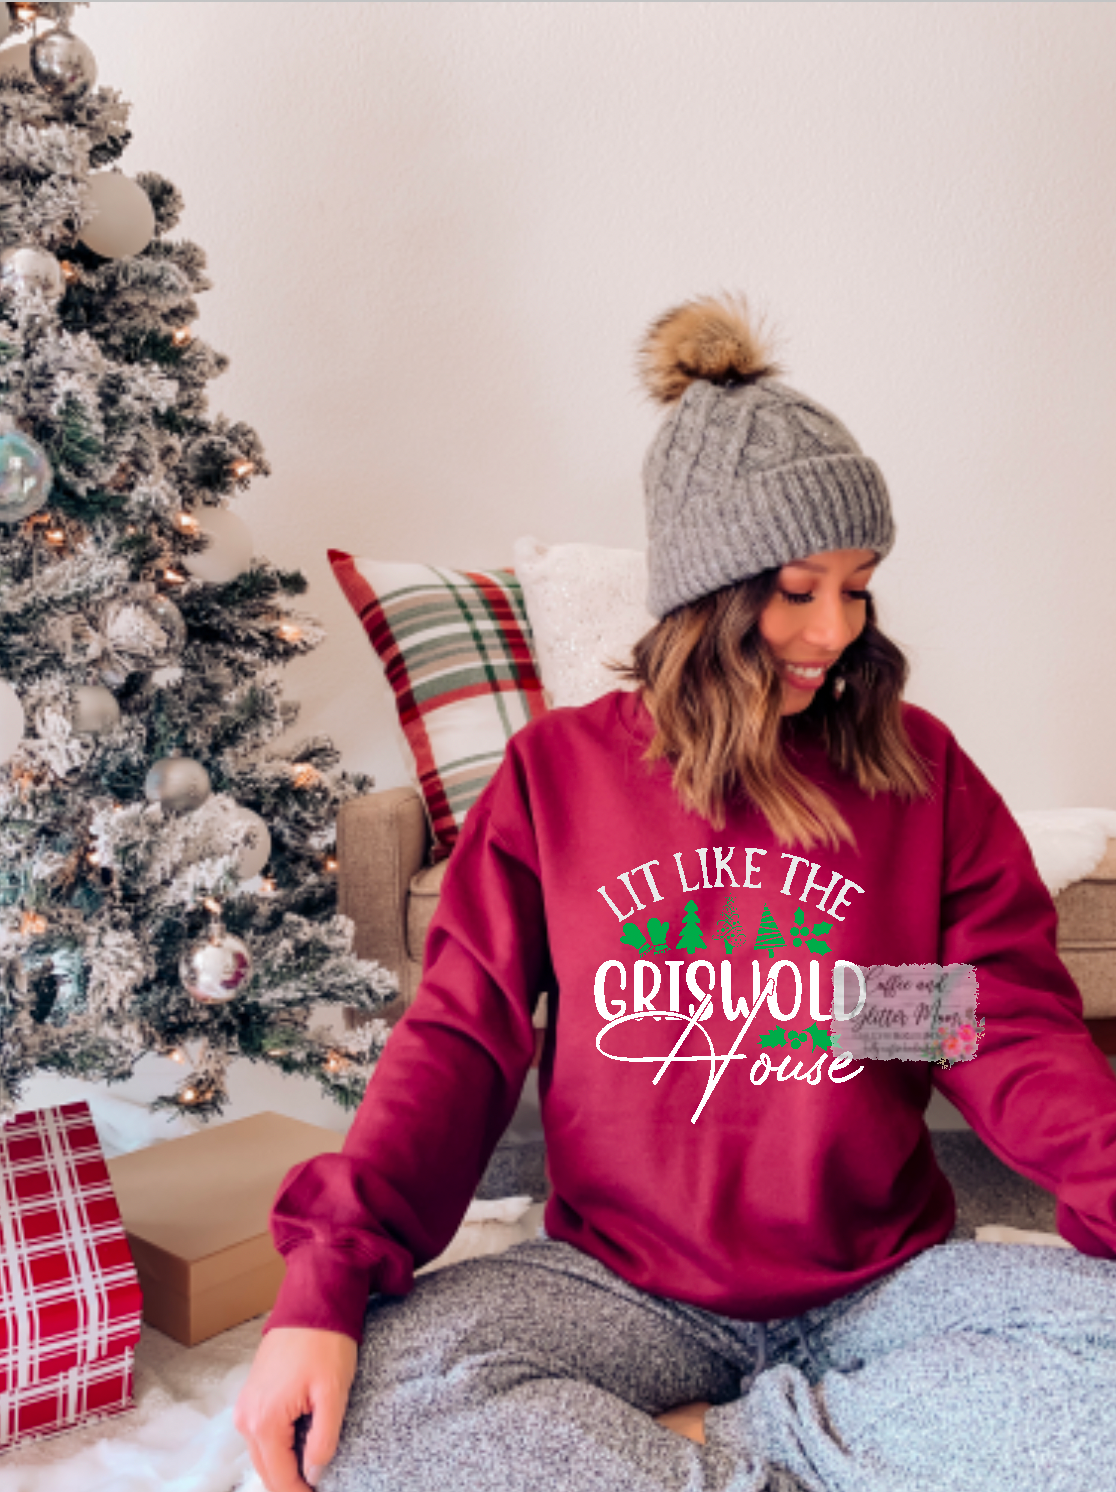 Lit Like The Griswold House Christmas Vacation Sweatshirt